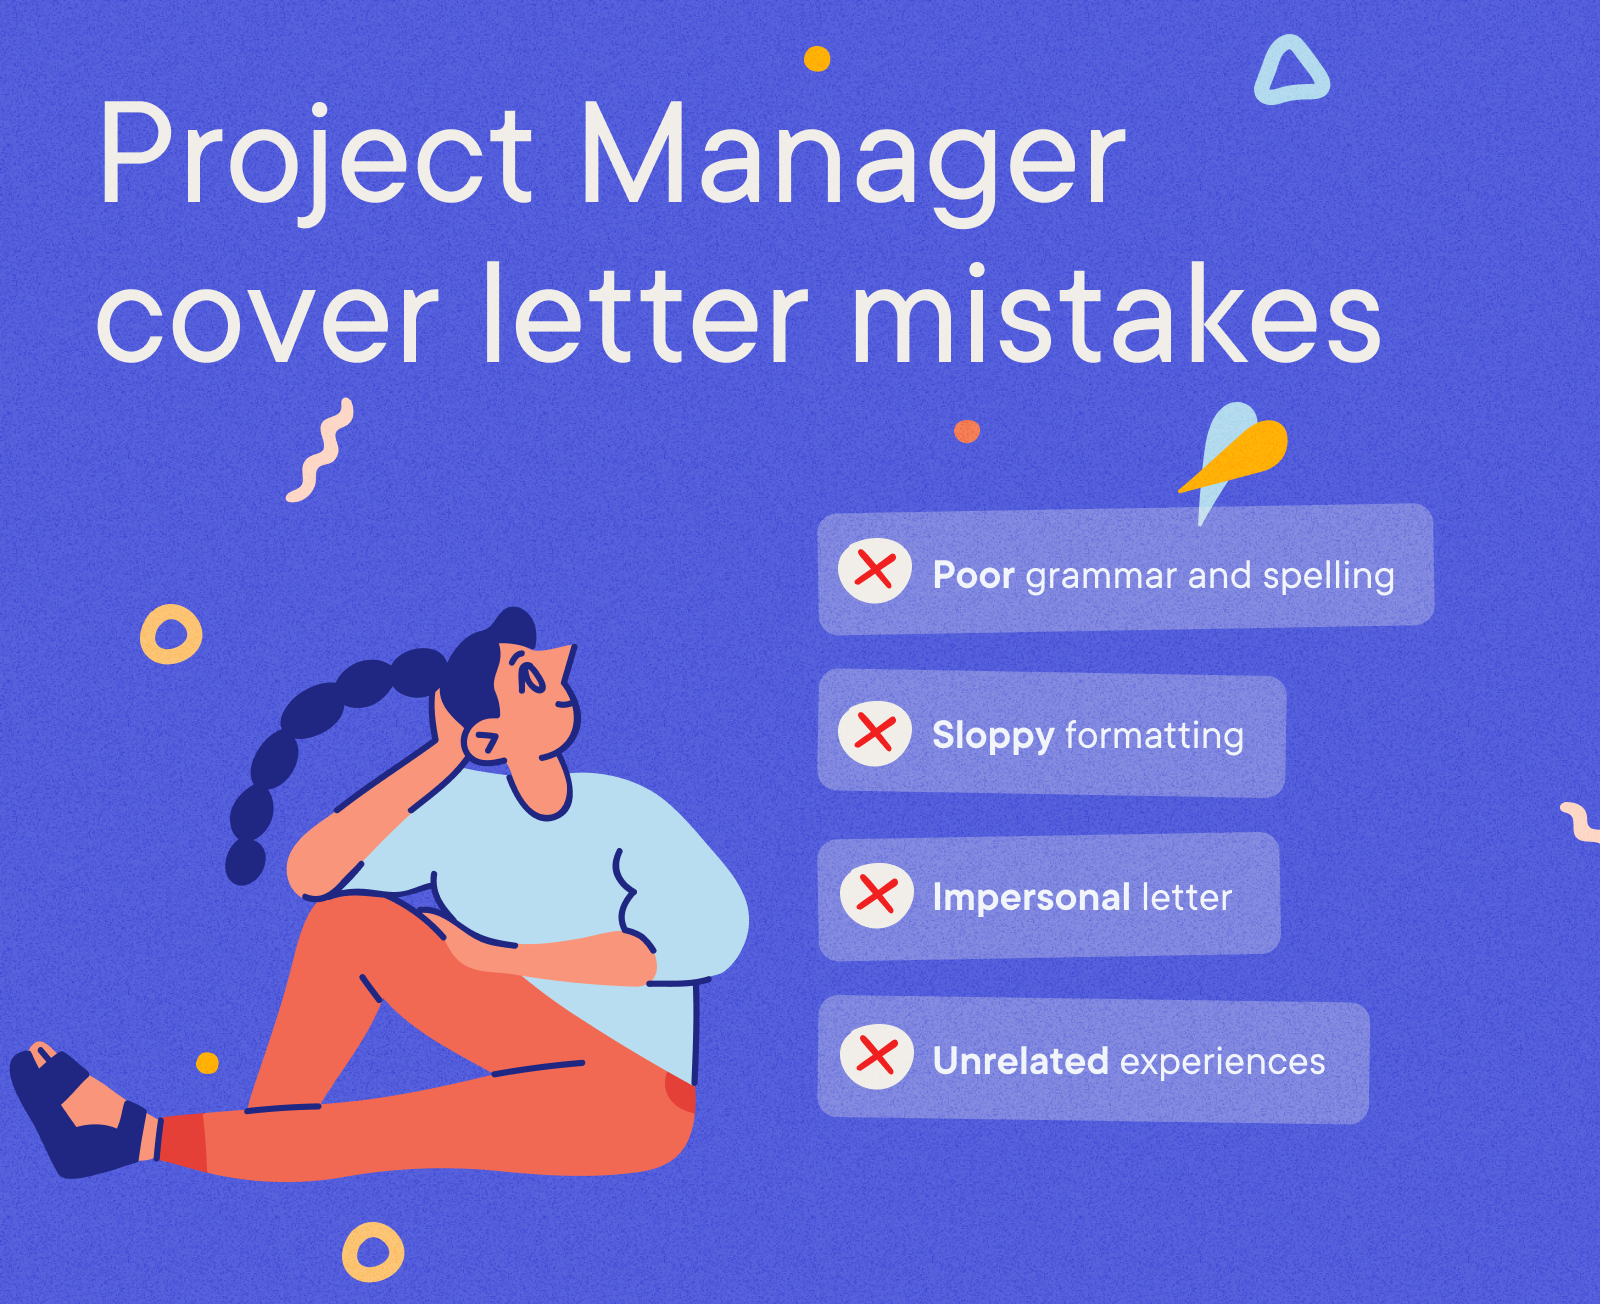 Project Manager Cover Letter Example - Project Manager cover letter mistakes